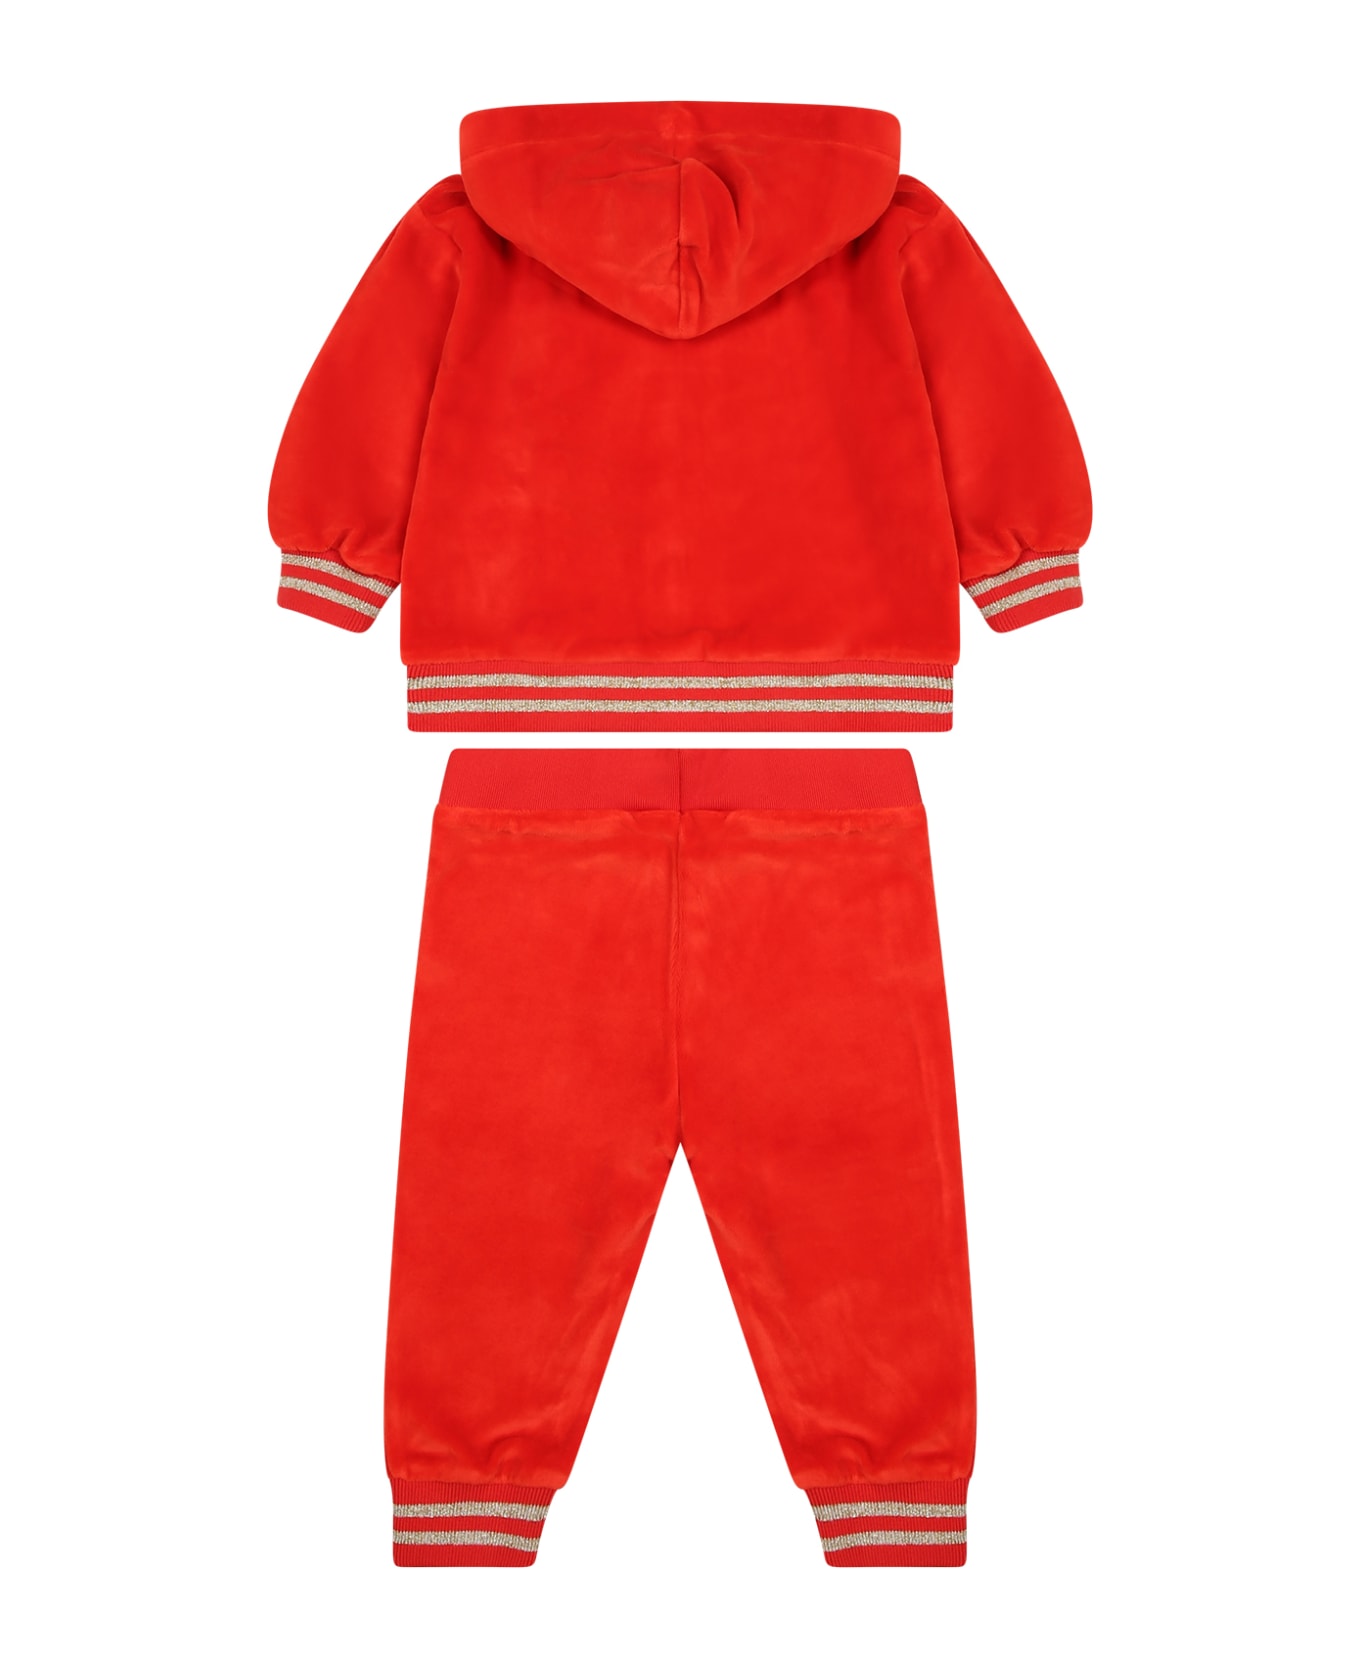 Moschino Red Suit For Baby Girl With Teddy Bear - Red